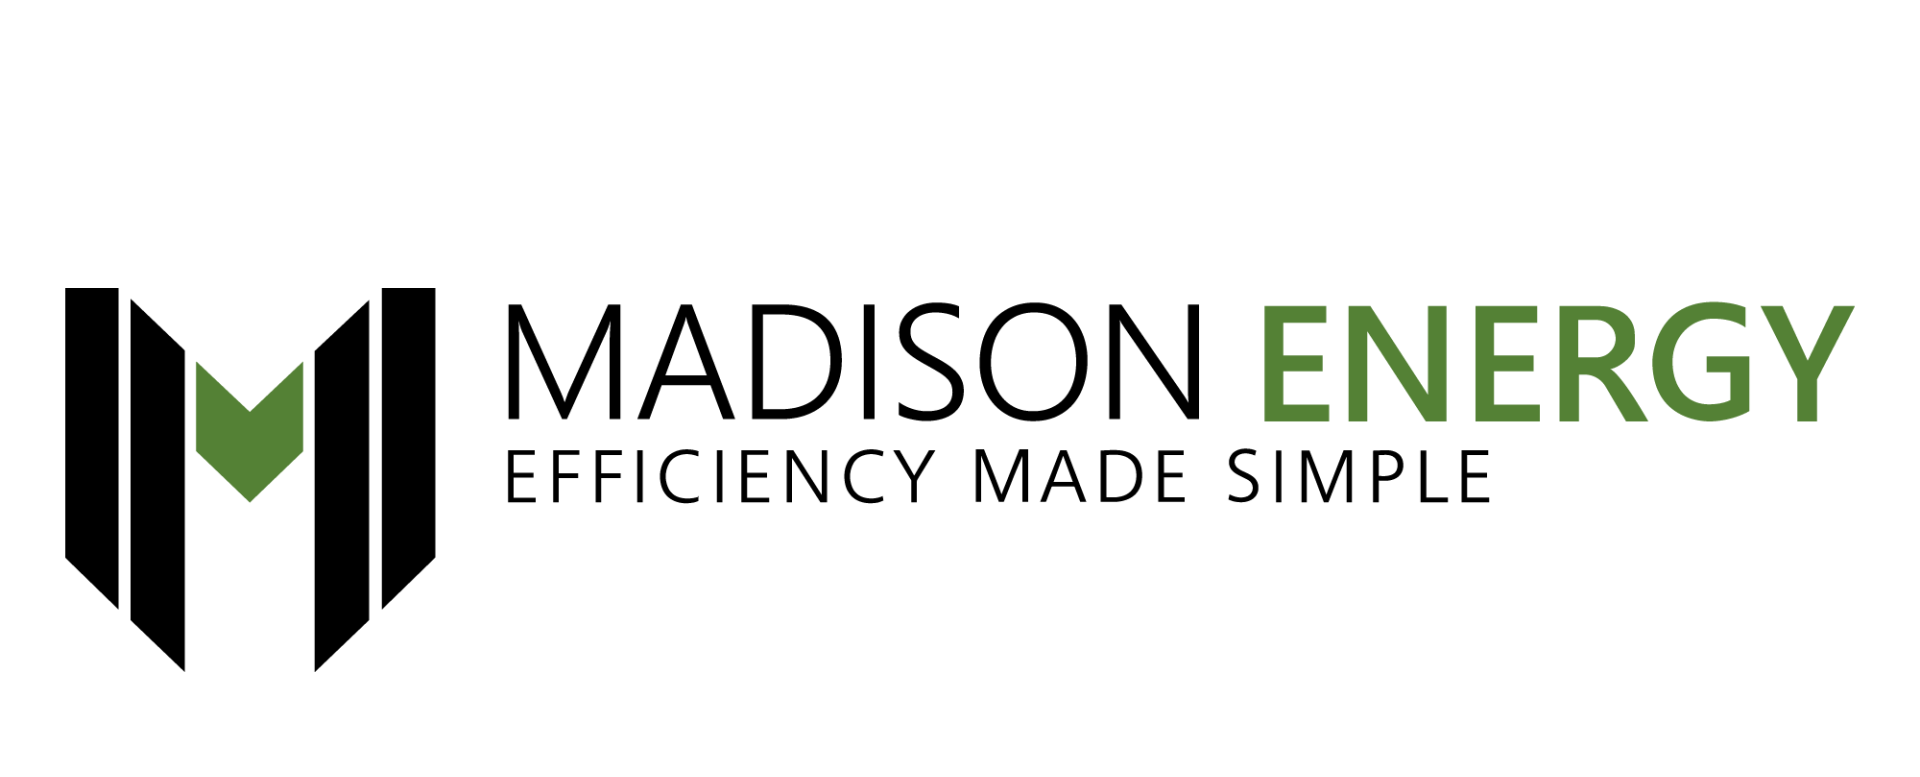 The Madison Energy Group